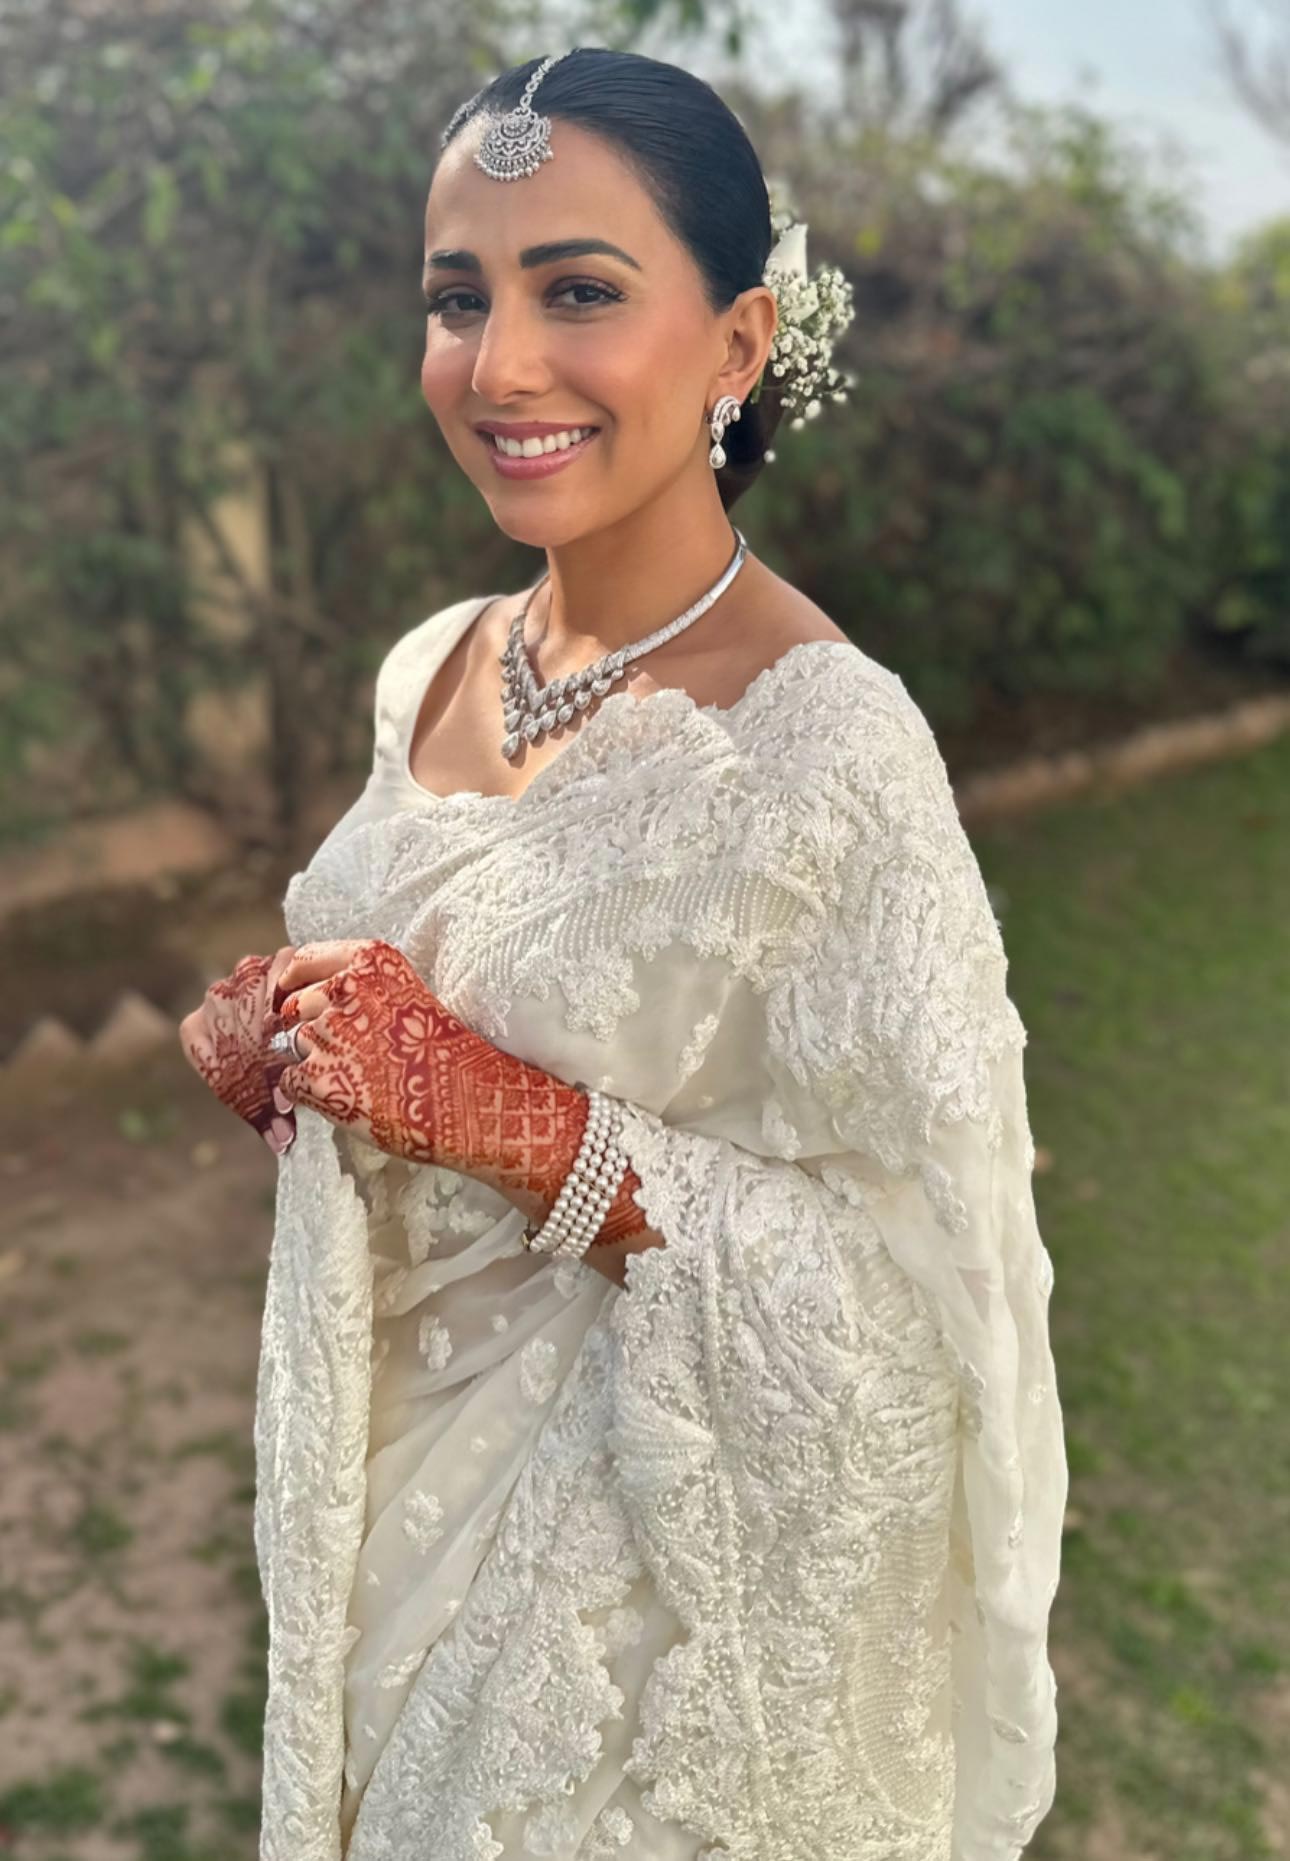 Pakistan actor Ushna Shah looks ethereal in a white lace saree that she paired with a luxurious white blouse. — Instagram/hamza.amin87